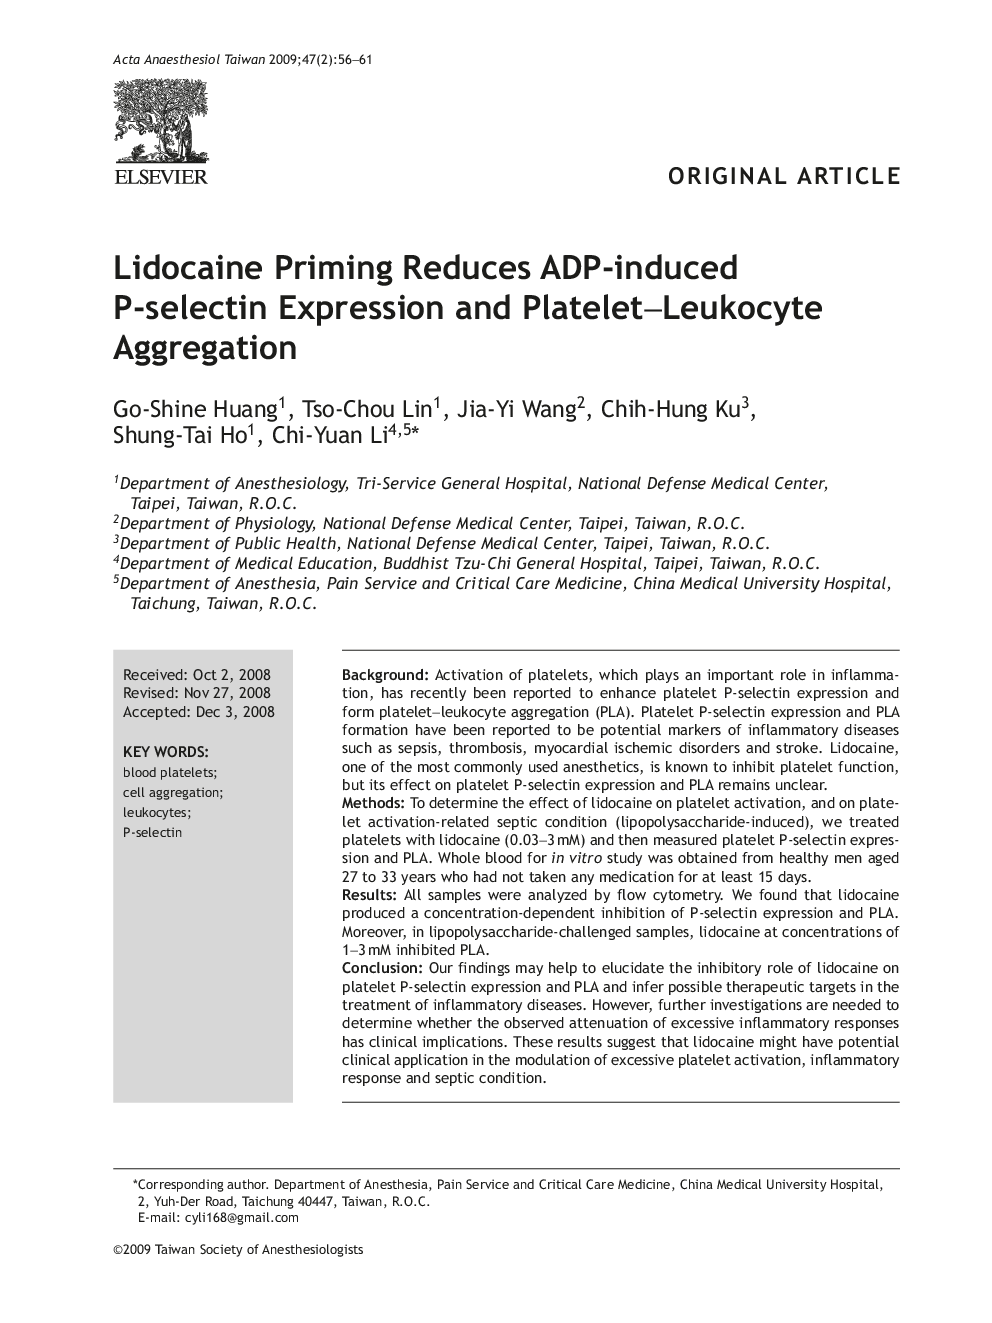 Lidocaine Priming Reduces ADP-induced P-selectin Expression and Platelet–Leukocyte Aggregation